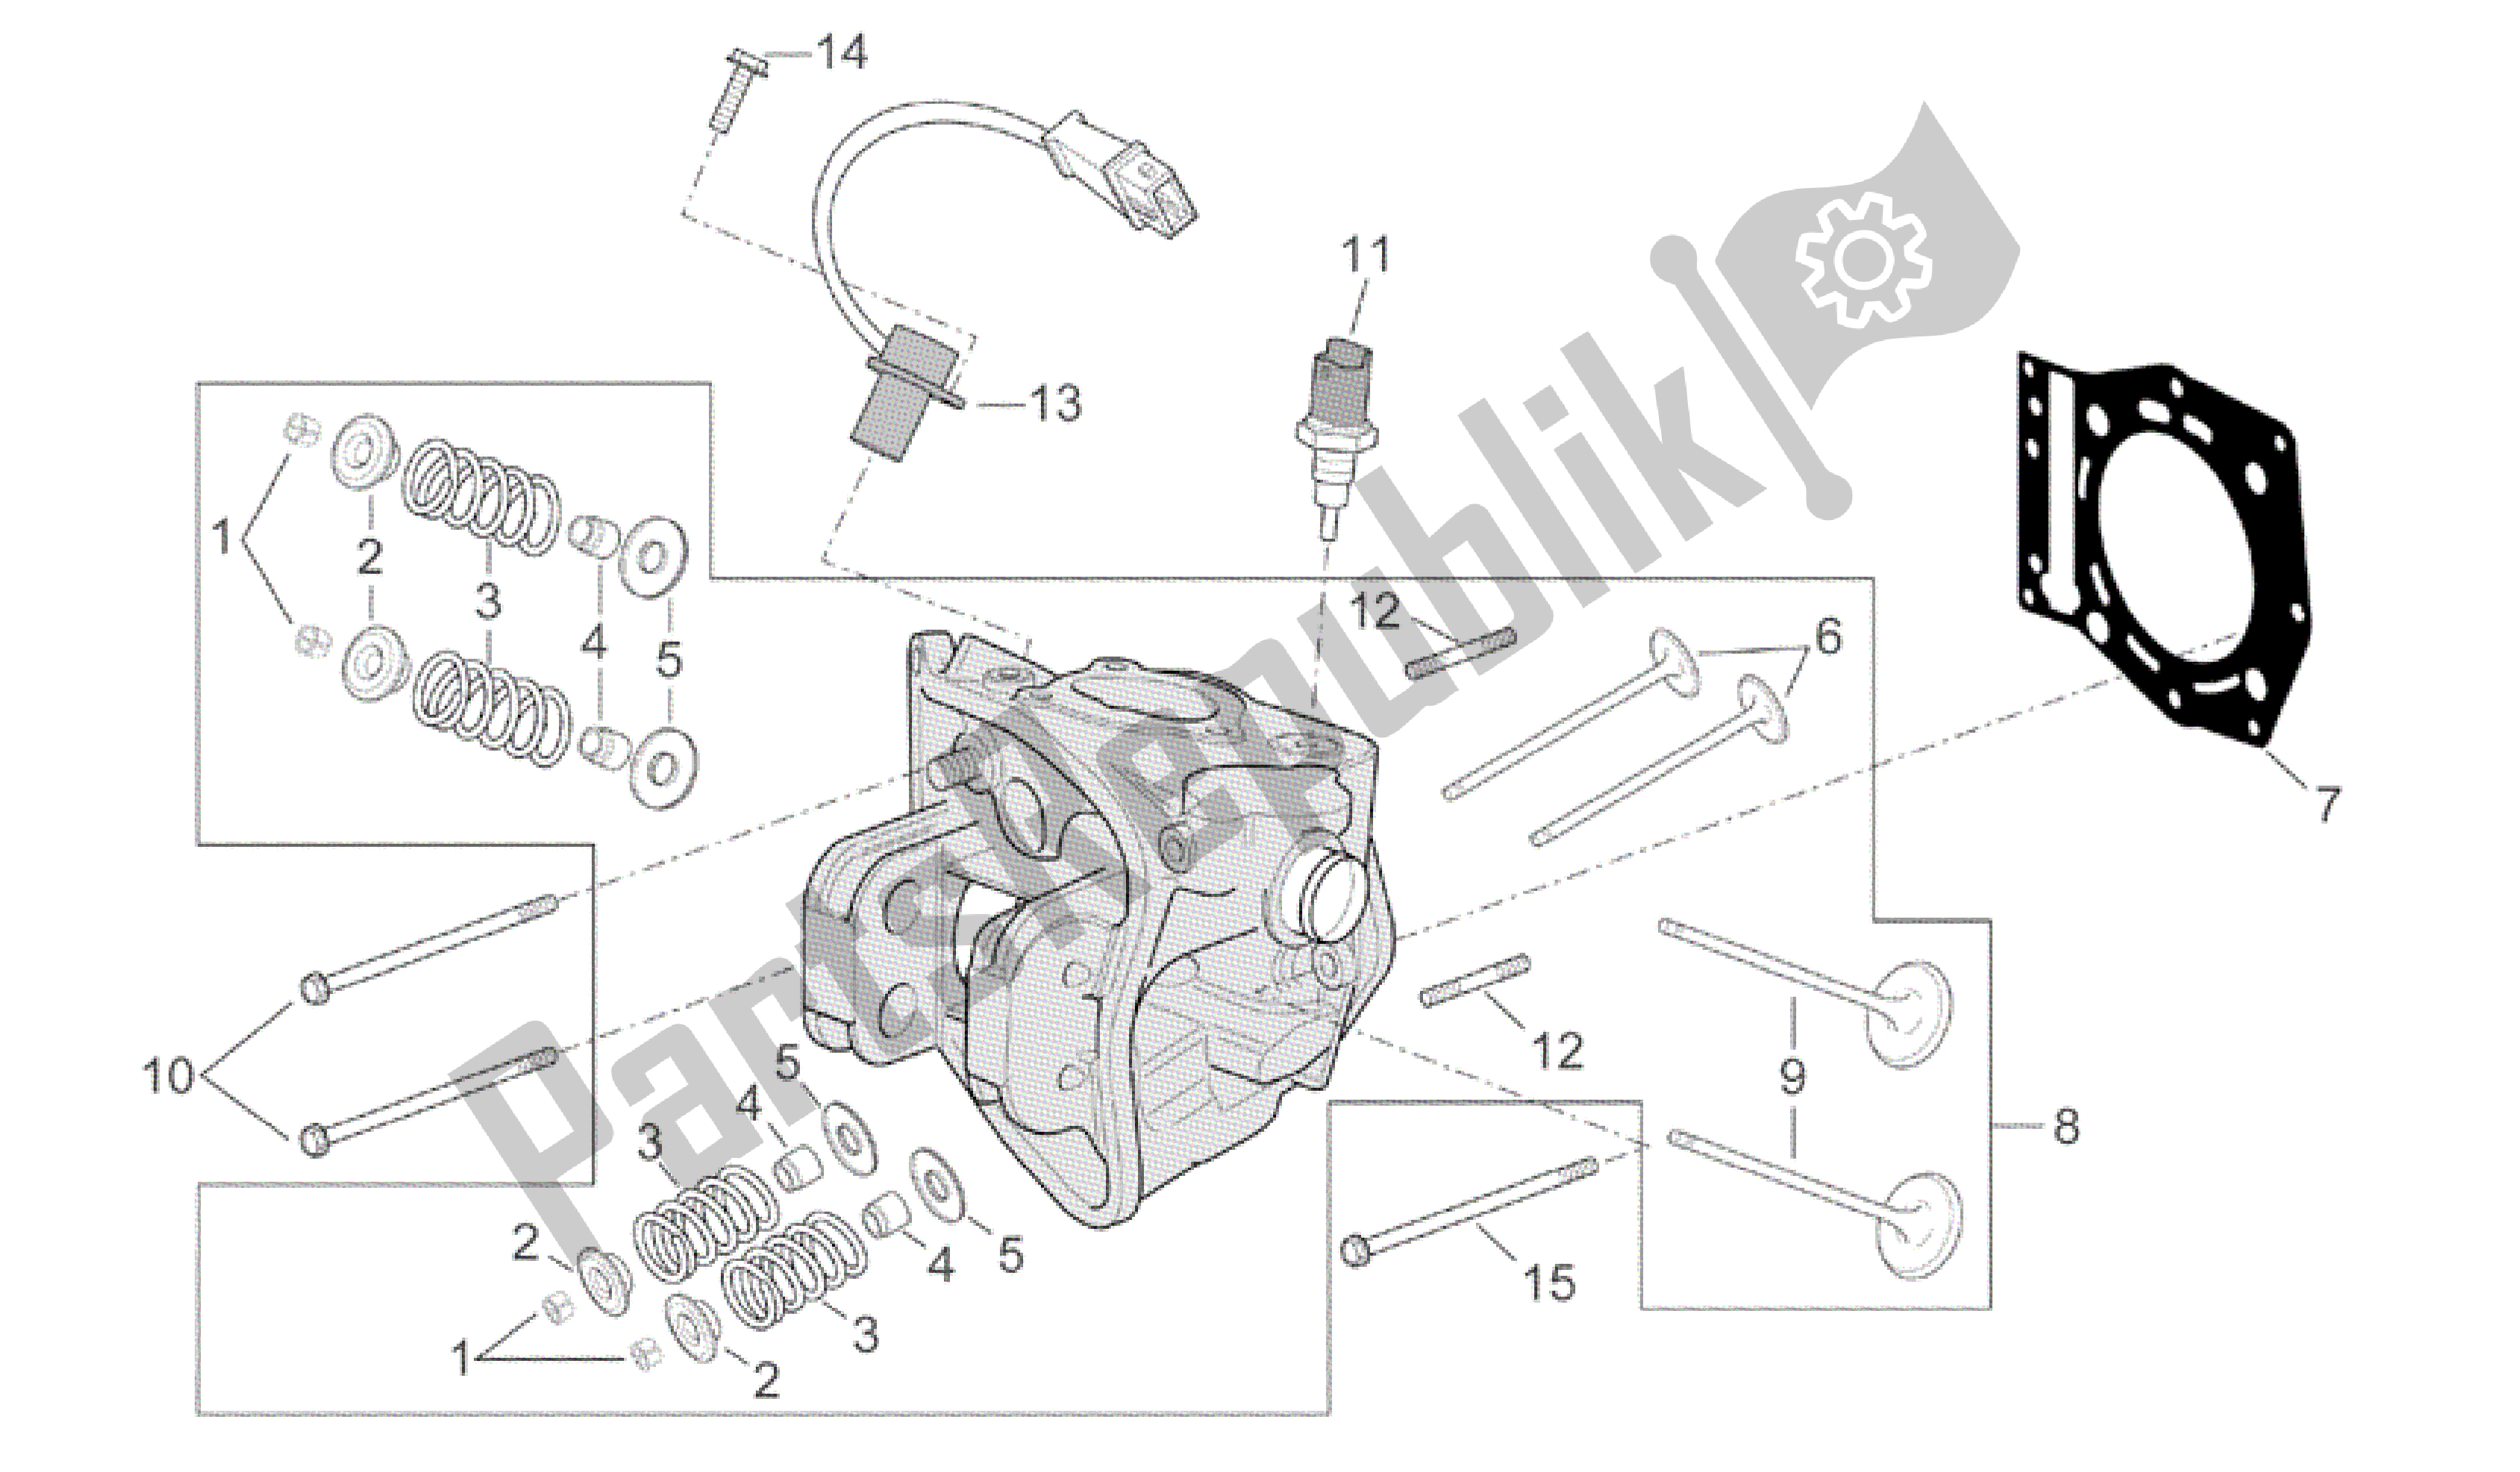 All parts for the Cylinder Head of the Aprilia Scarabeo 500 2003 - 2006